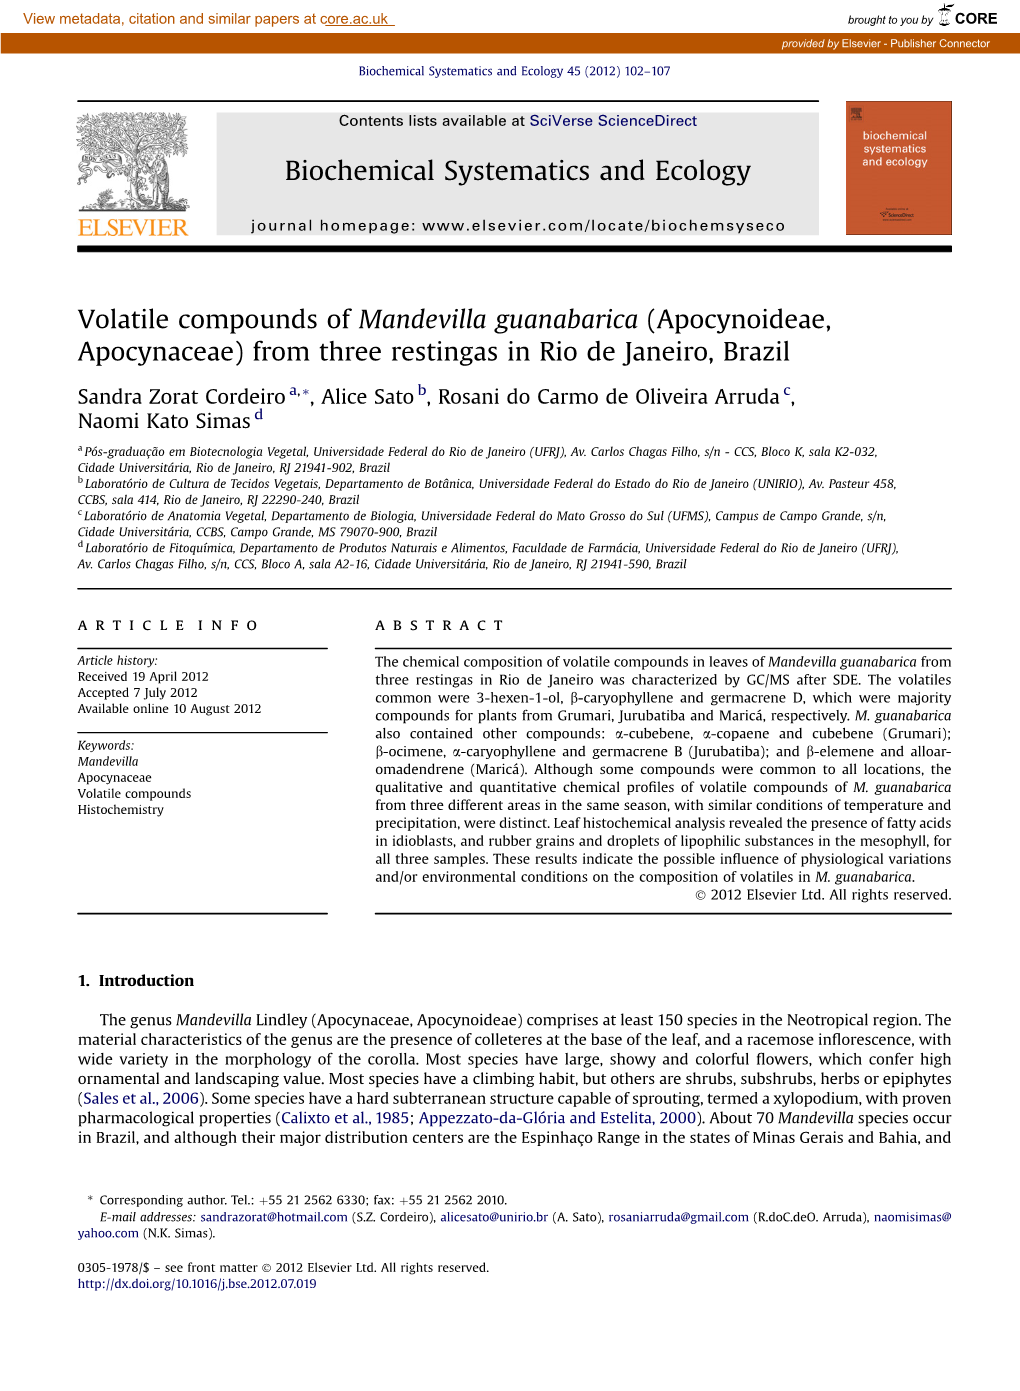 Volatile Compounds of Mandevilla Guanabarica (Apocynoideae, Apocynaceae) from Three Restingas in Rio De Janeiro, Brazil